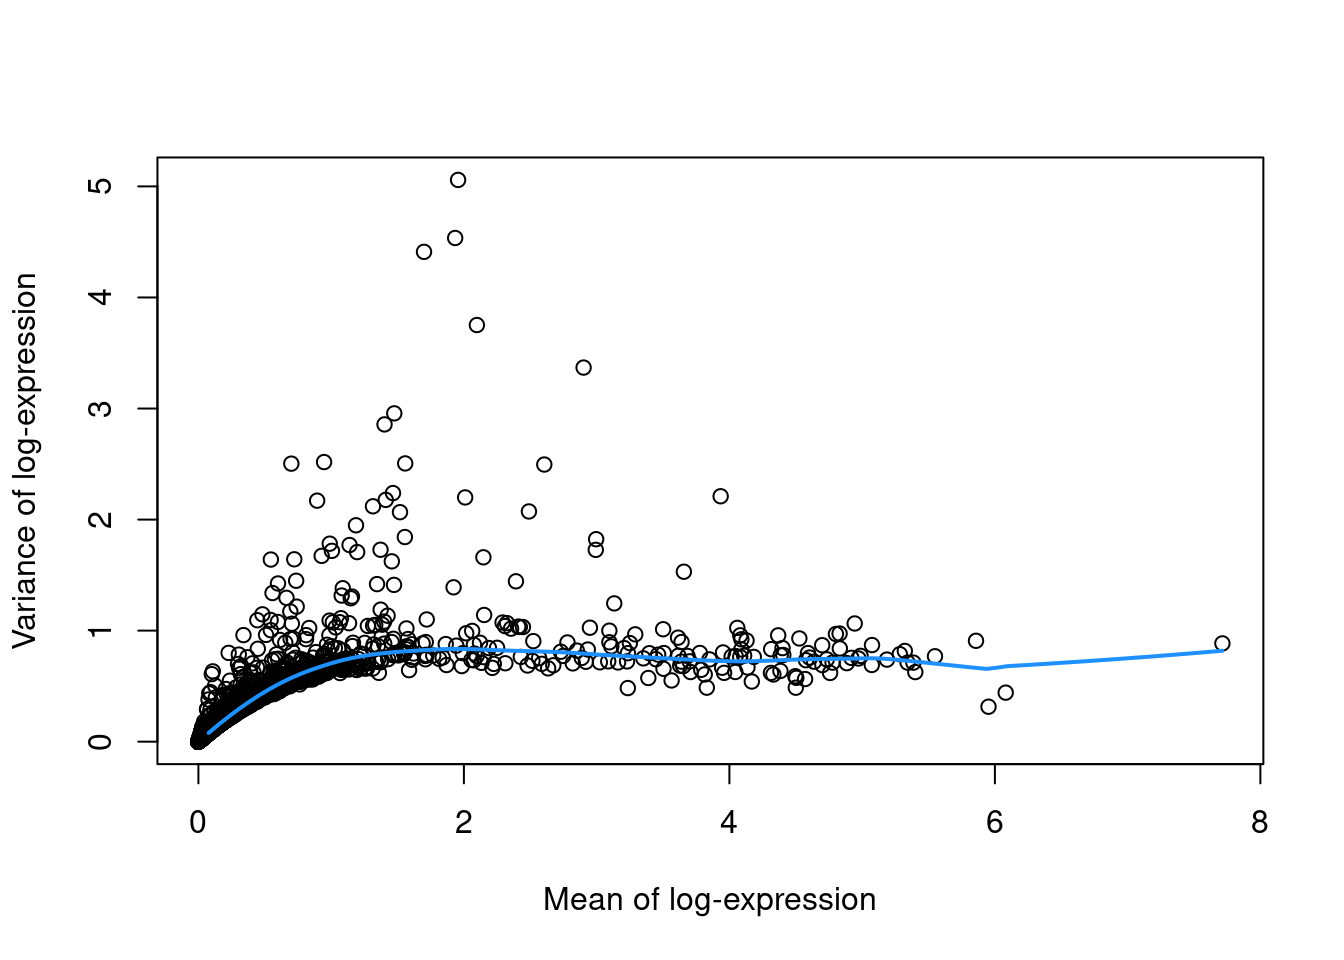 Variance in the PBMC data set as a function of the mean. Each point represents a gene while the blue line represents the trend fitted to all genes.